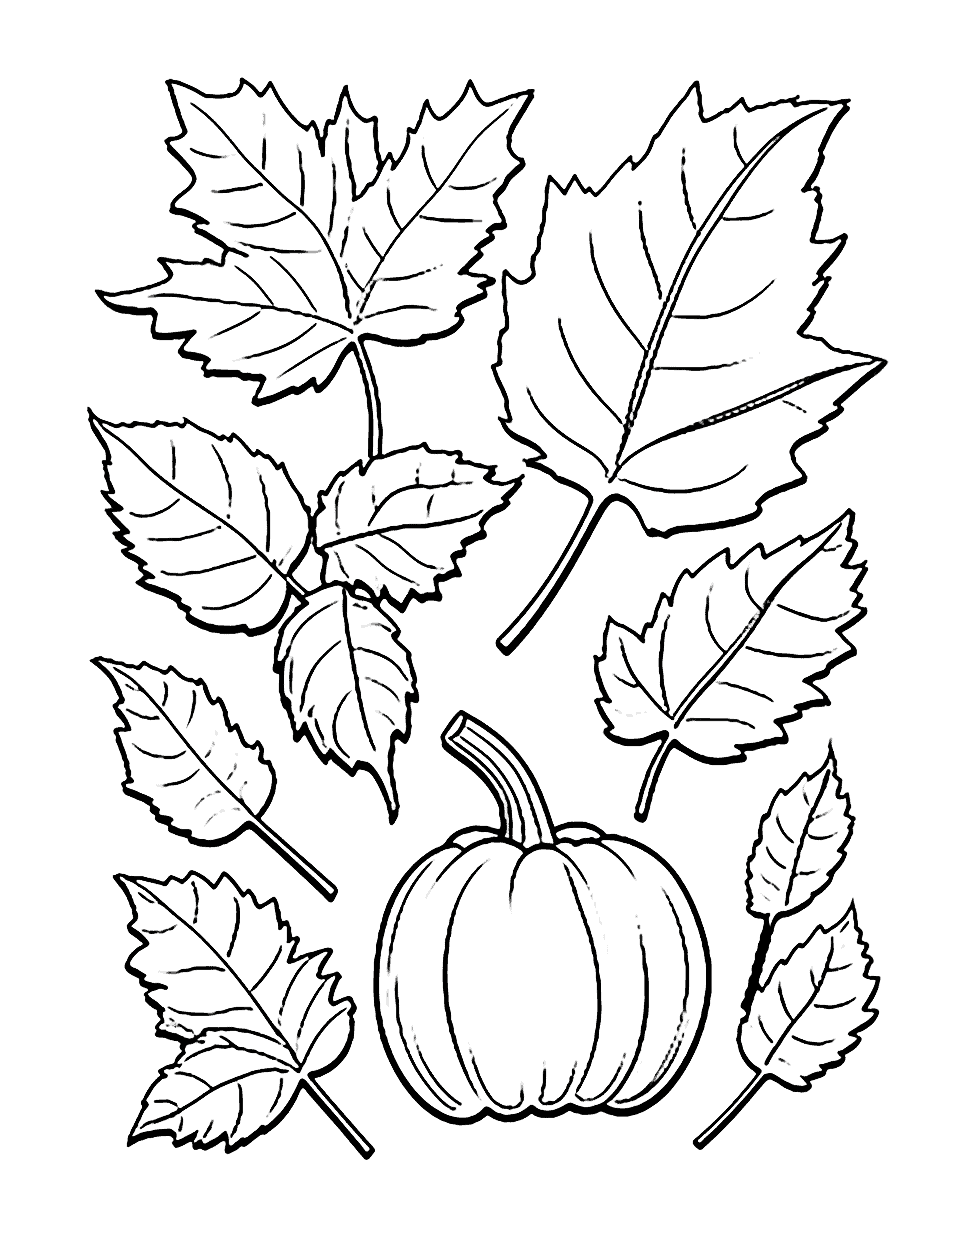 Fall Colors Extravaganza Thanksgiving Coloring Page - A page filled with fall elements for children to color with autumn hues.